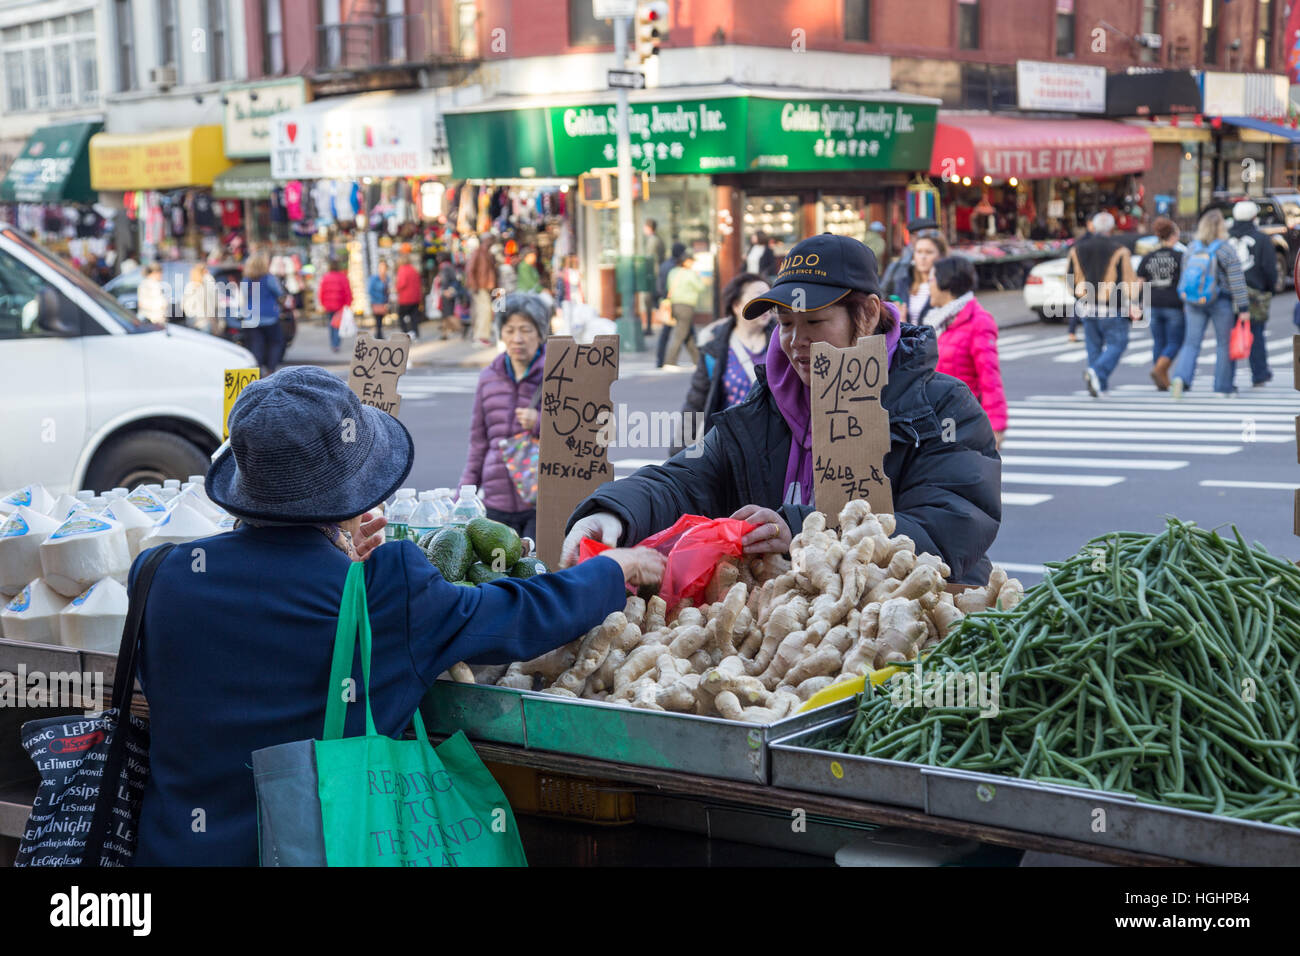 New York, United States of America - November 11, 2016: Market seller in Chinatown district in Manhattan Stock Photo